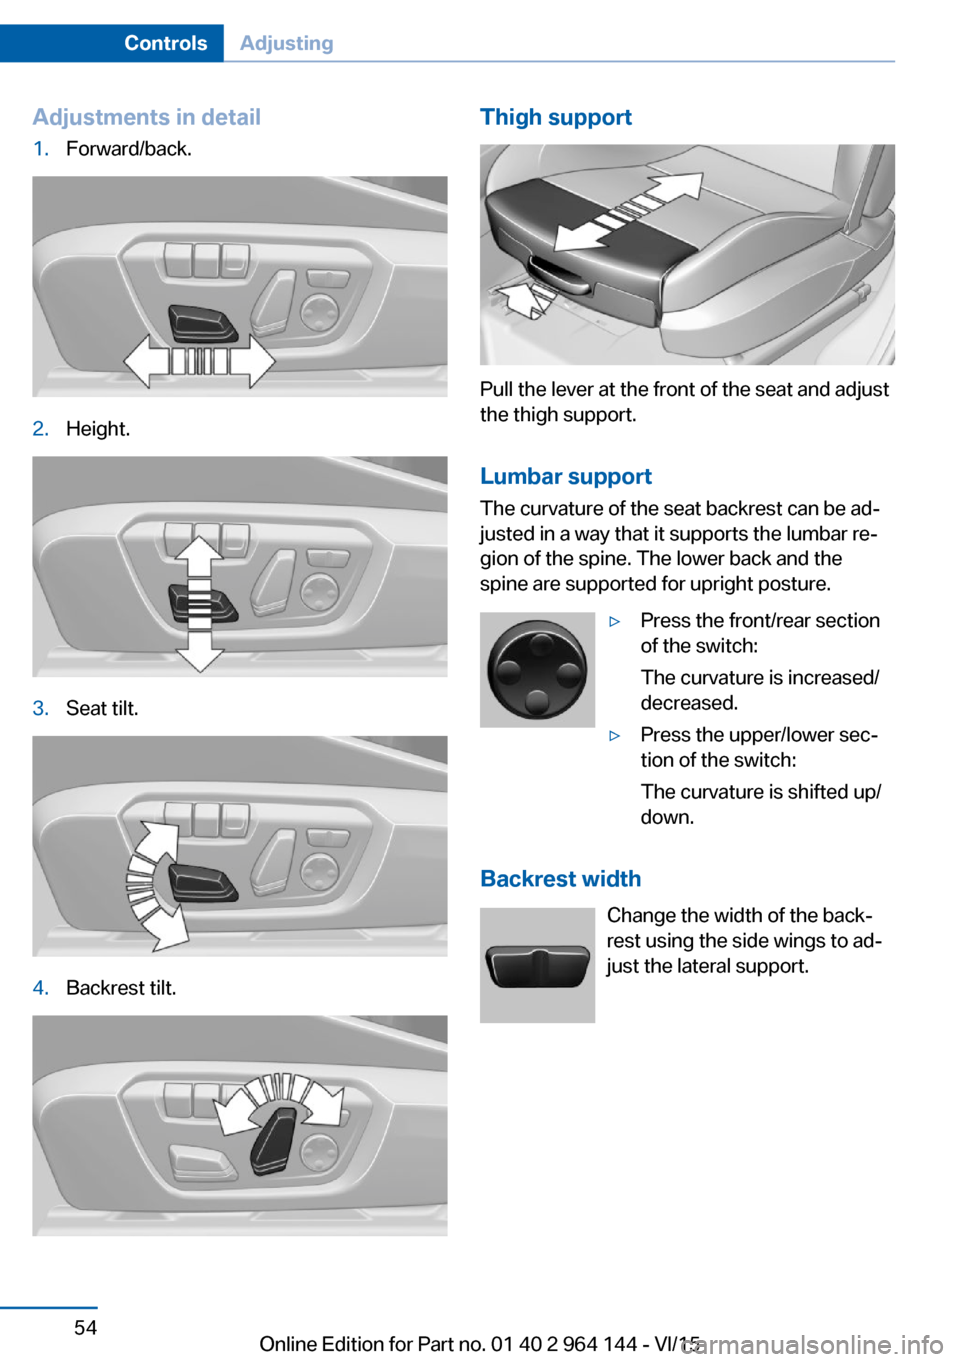 BMW X4 2015 F26 Owners Manual Adjustments in detail1.Forward/back.2.Height.3.Seat tilt.4.Backrest tilt.Thigh support
Pull the lever at the front of the seat and adjust
the thigh support.
Lumbar support The curvature of the seat ba